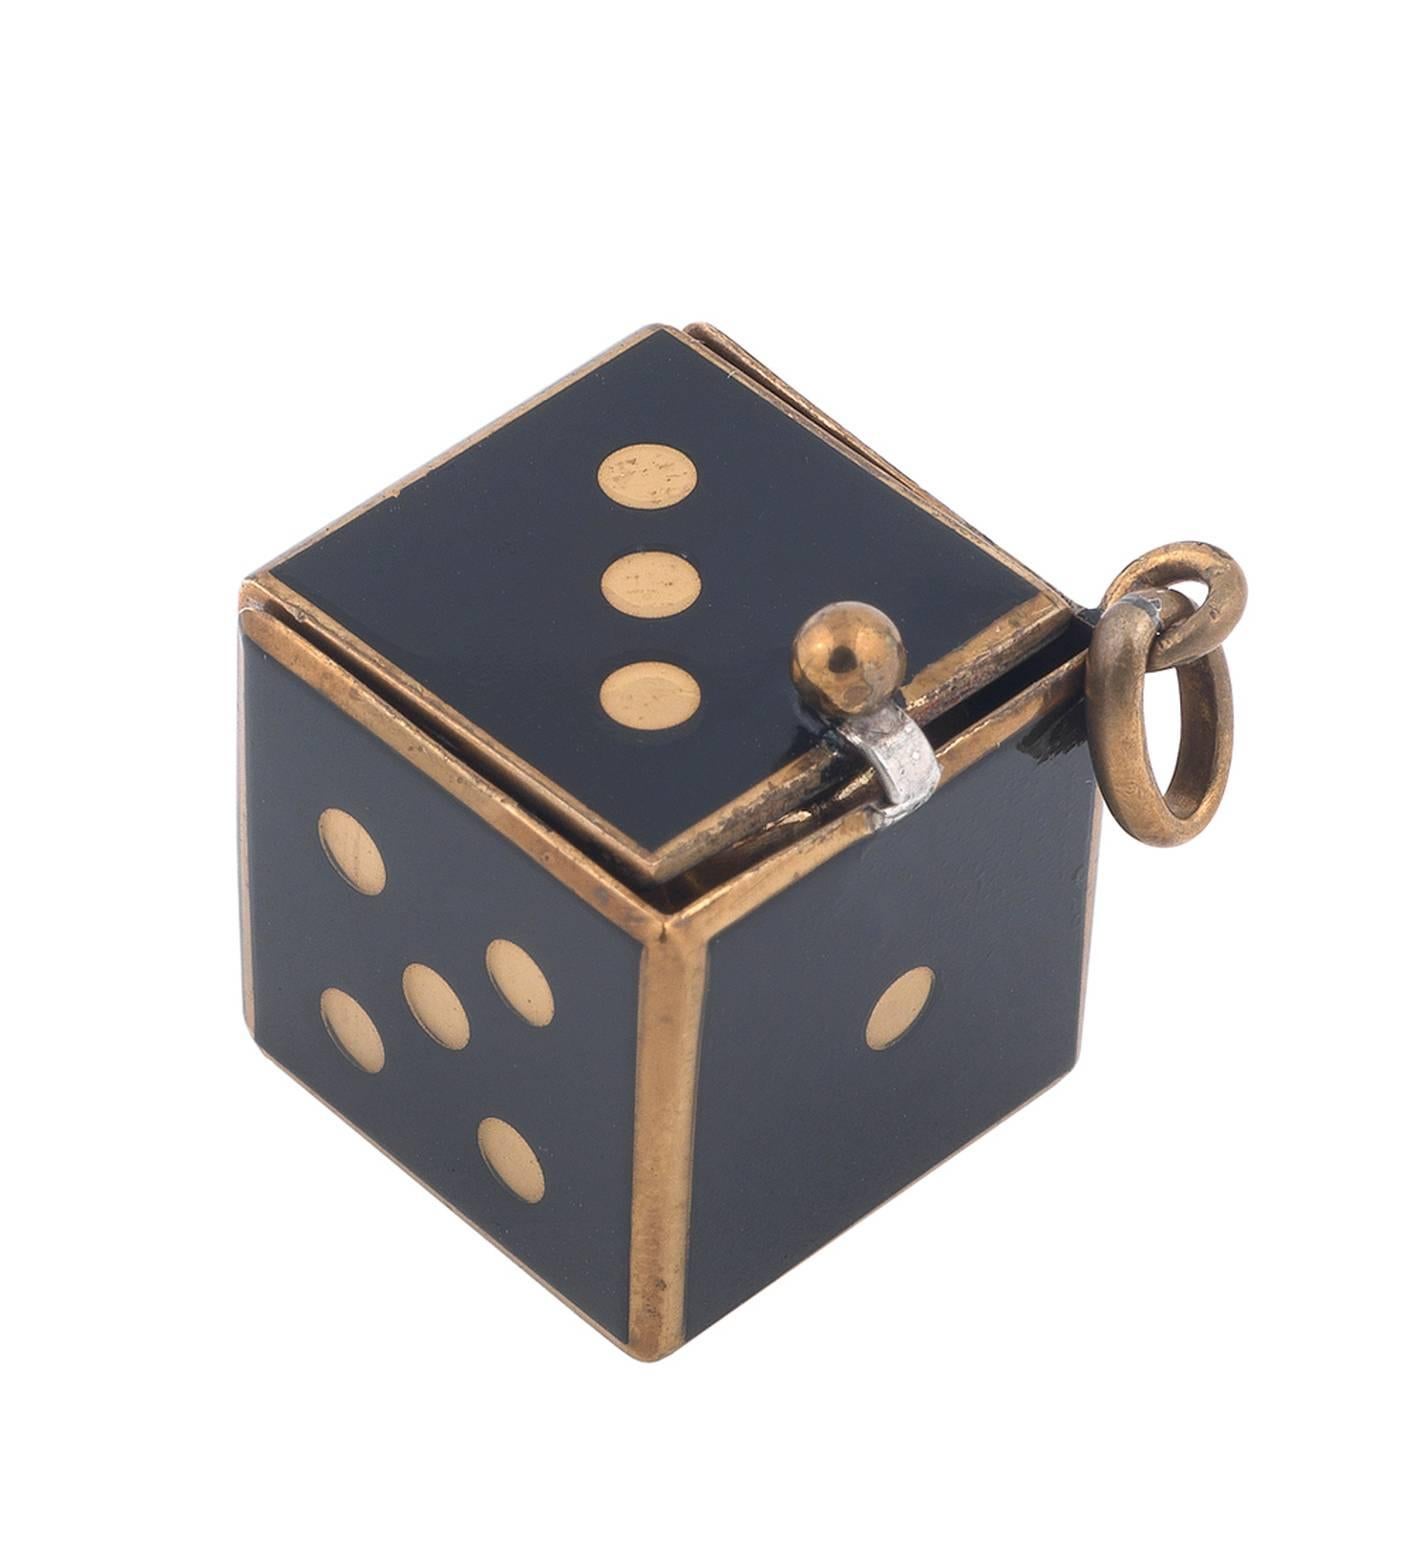 PLEASE NOTE: OUR PRICE IS FULLY INCLUSIVE OF SHIPPING, IMPORTATION TAXES & DUTIES.


The watch is contained in a gilt metal and black enamel dice shaped case with hanging ring at one side.

Manual wind movement, silvered dial with black printed